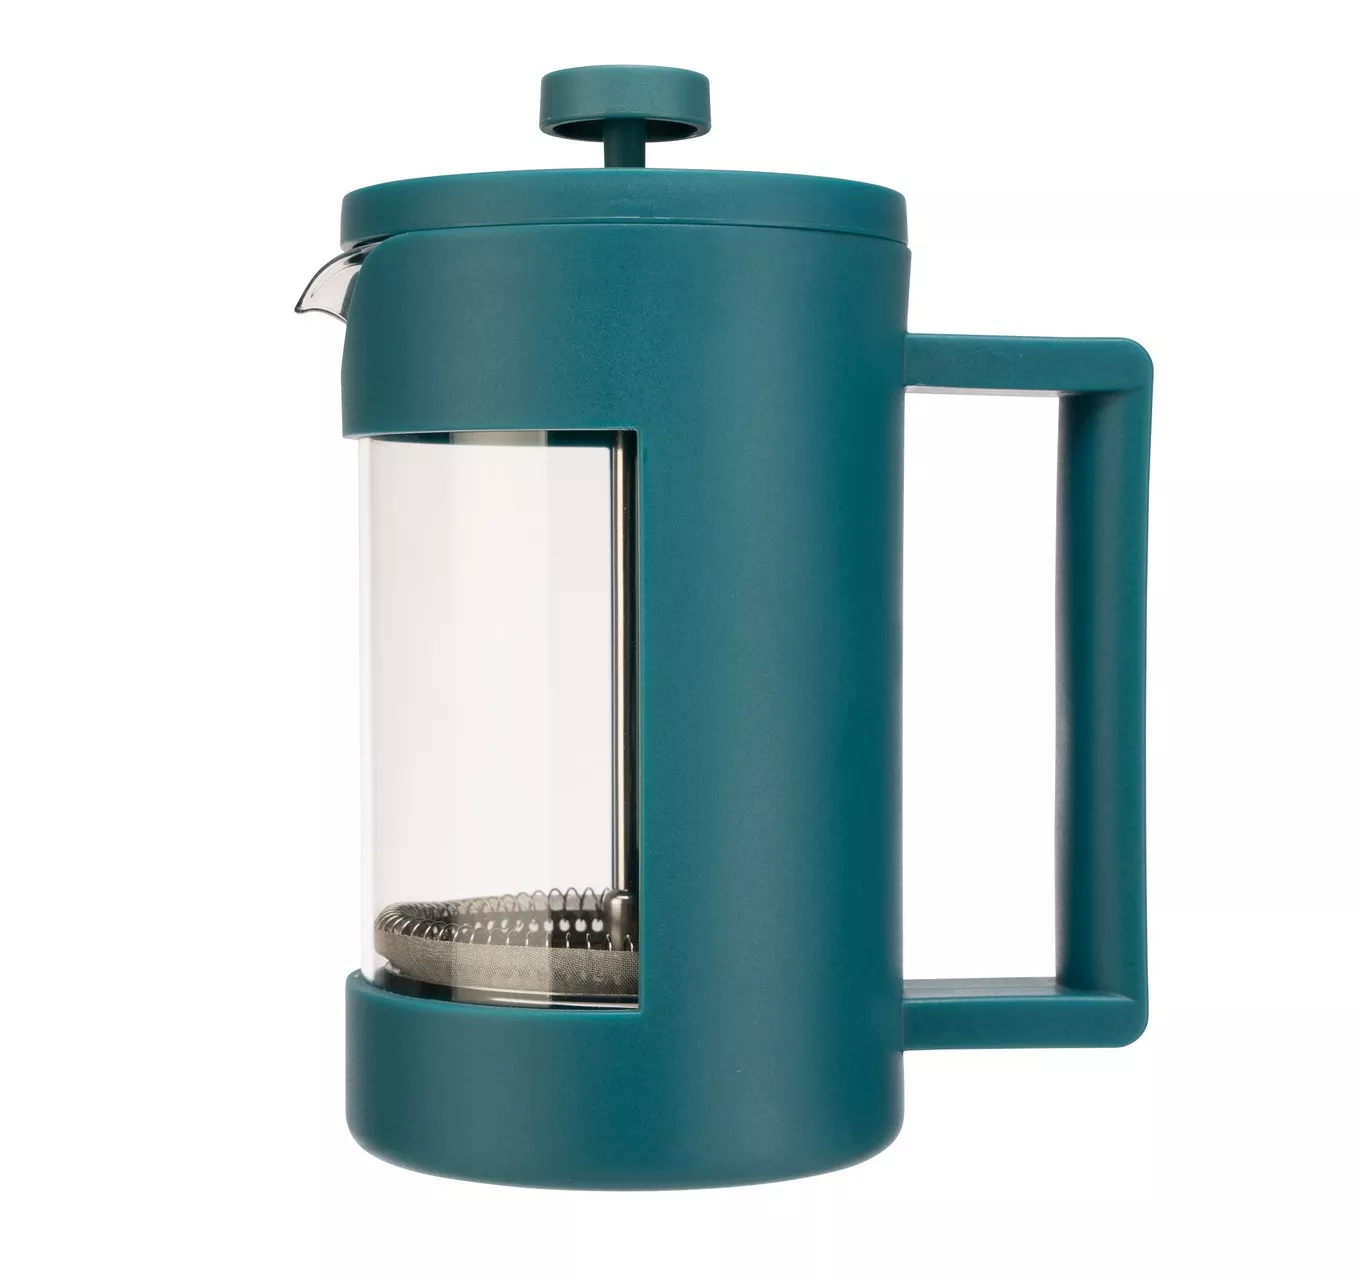 Cafetiere 6 Cup - Green